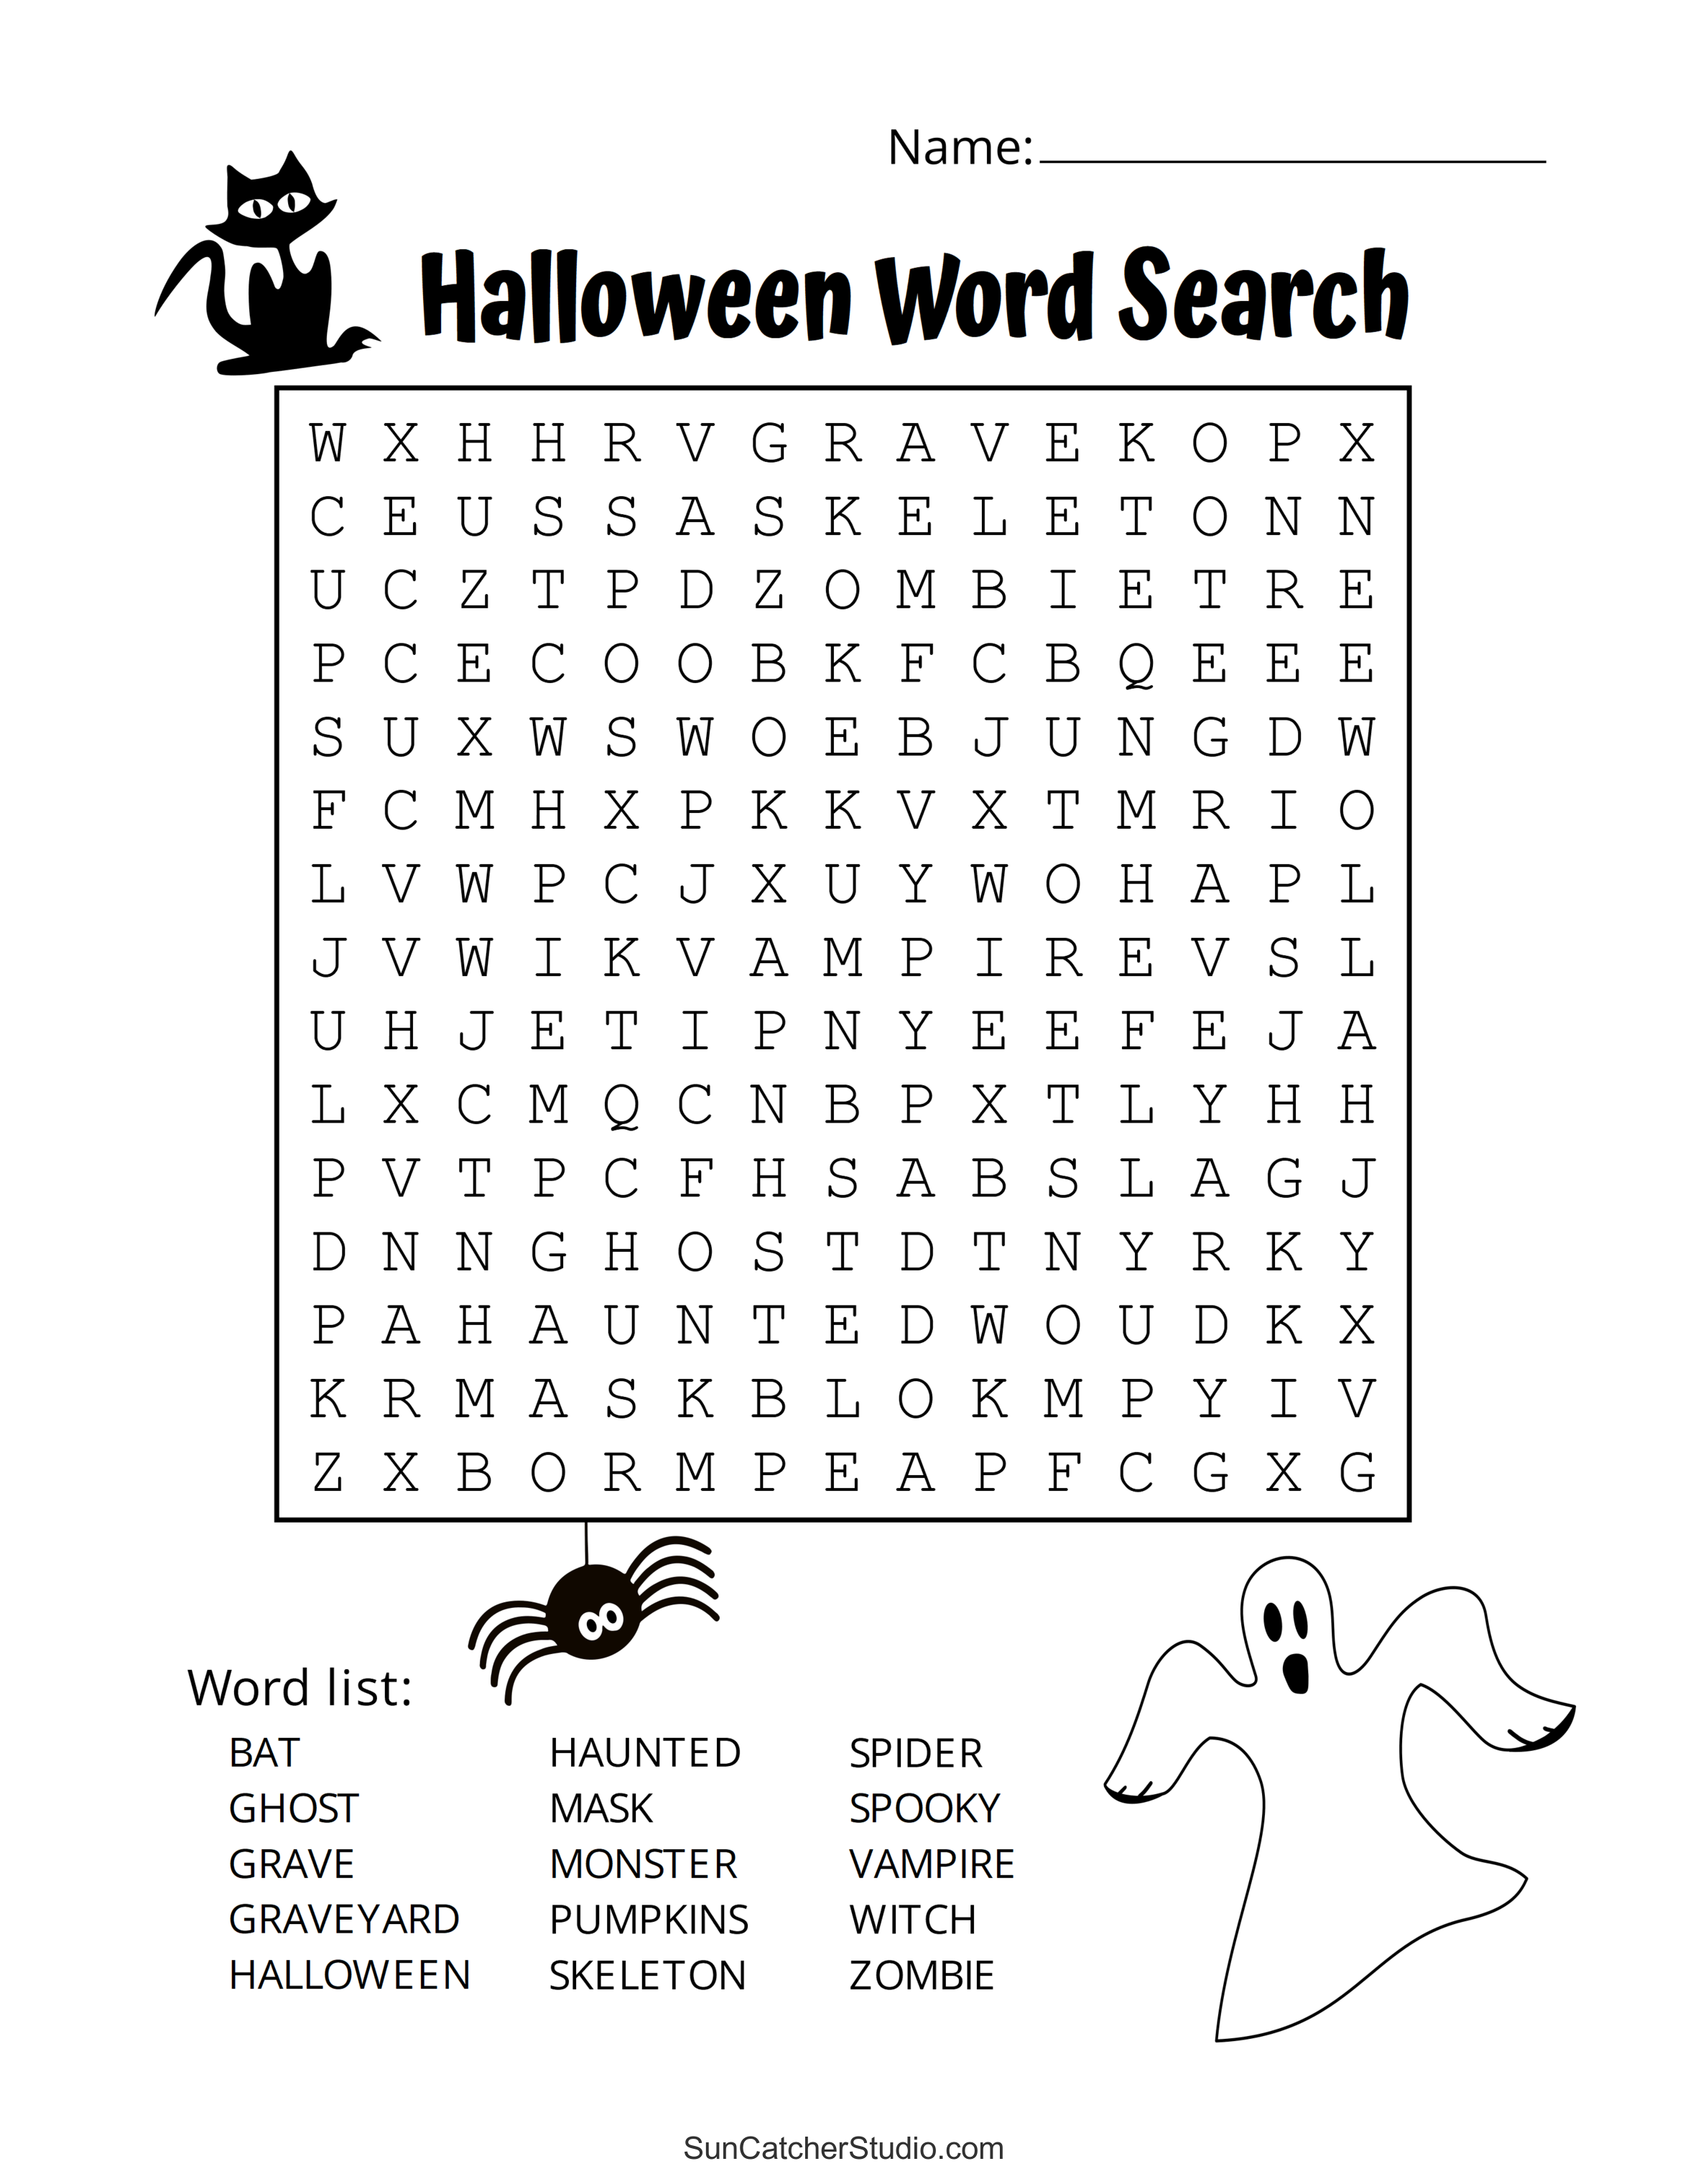 free-printable-halloween-word-searches-for-adults-word-search-printable